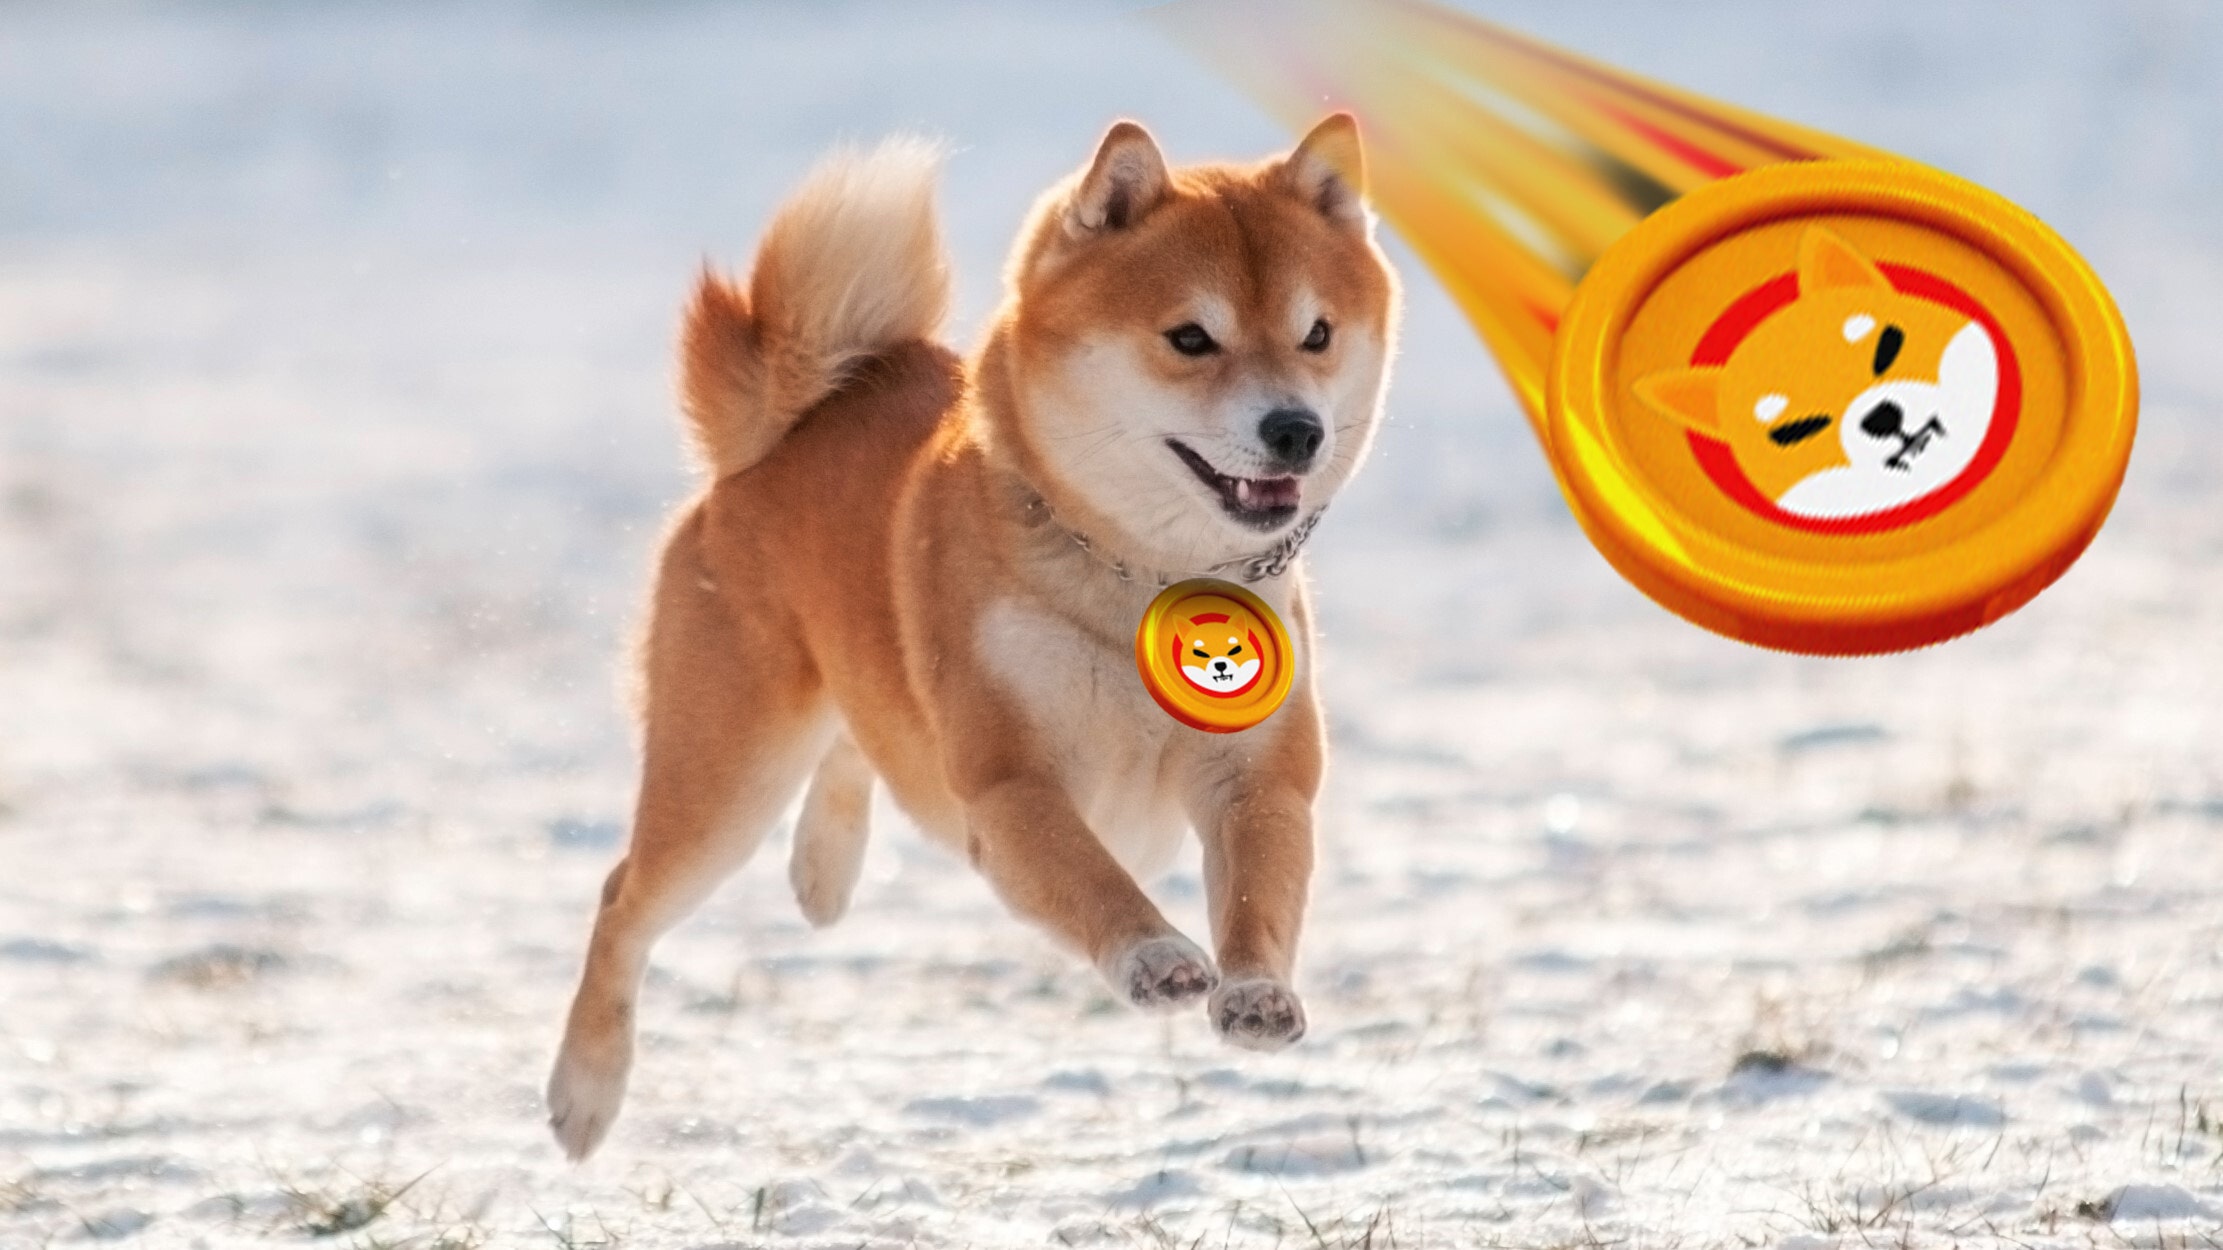 Shiba Inu Set To Launch Beta Version Of Doggy DAO To Give Users More Power, Reduce Whale Influence